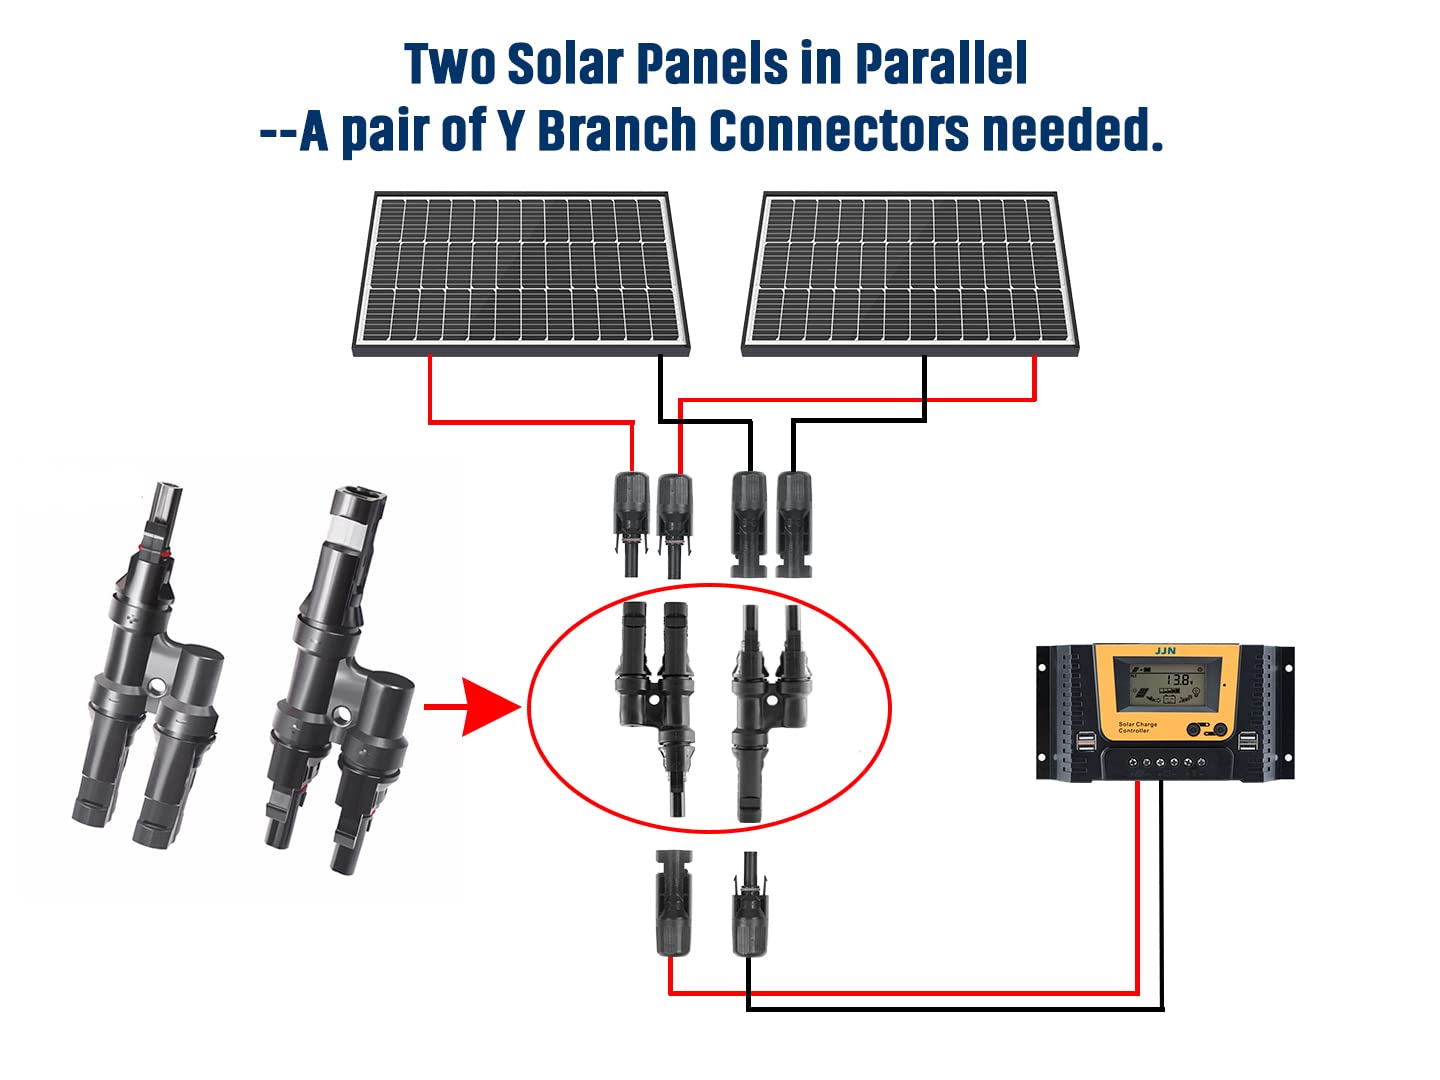 JJN Solar Branch Connectors 2 to 1 Solar Connector Waterproof Solar Y Connector for Parallel Connection Between Solar Panels FMM+MFF(1 Pair)